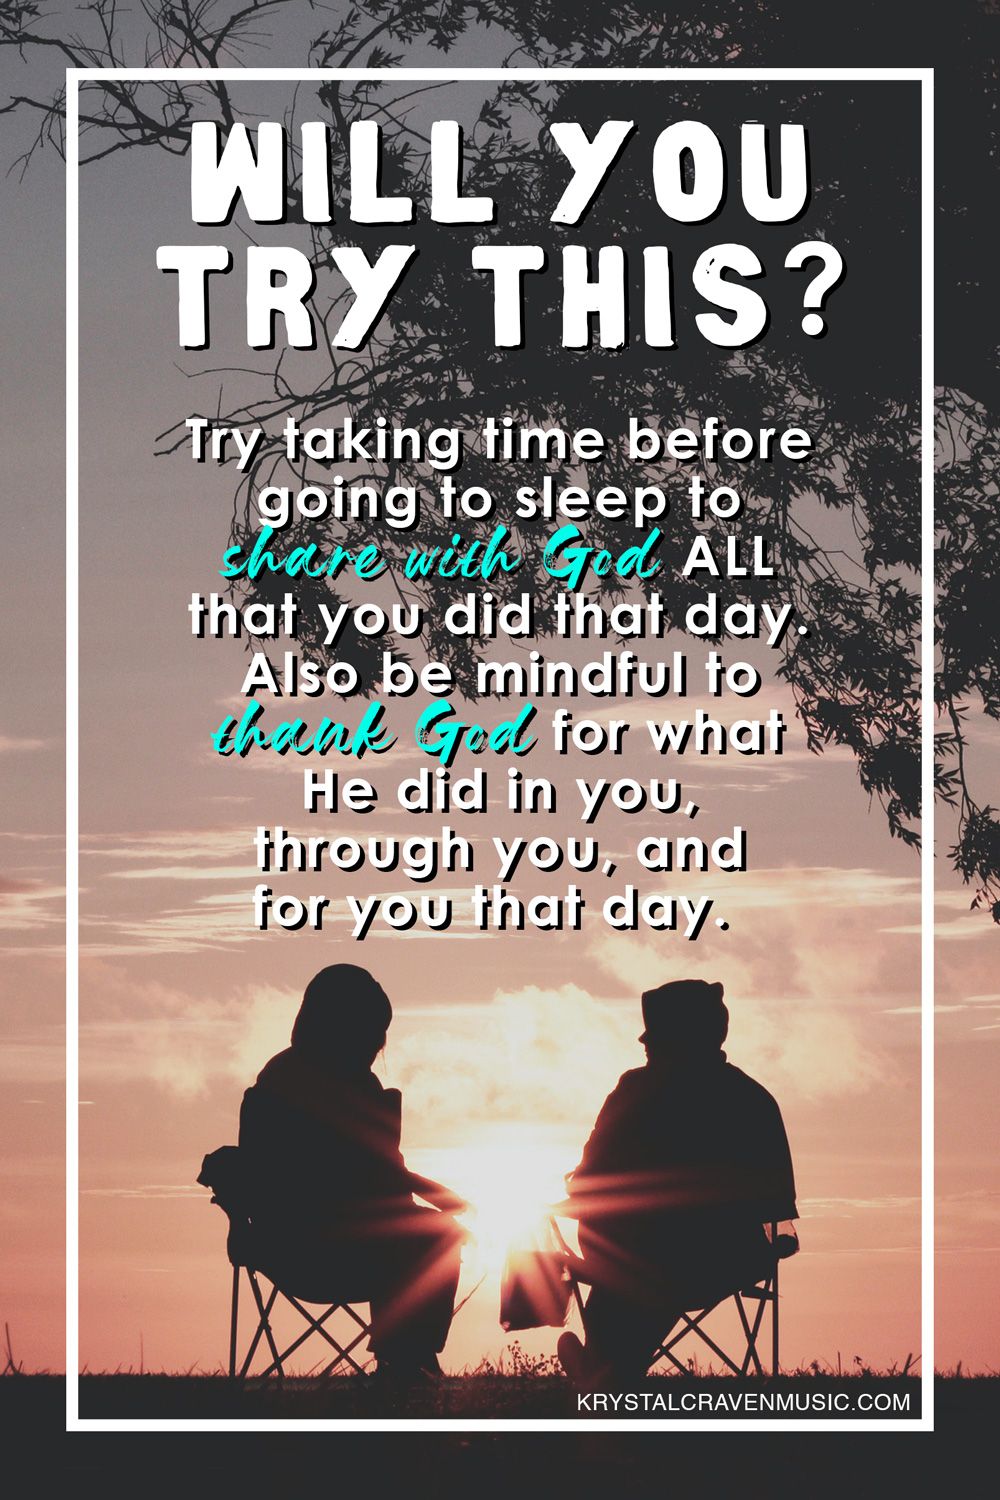 The text "Will You Try This? Try taking time before going to sleep to share with God ALL that you did that day. Also be mindful to thank God for what He did in you, through you, and for you that day." The text is overlaying a silhouette of two people sitting under a tree with the sun setting in the background.